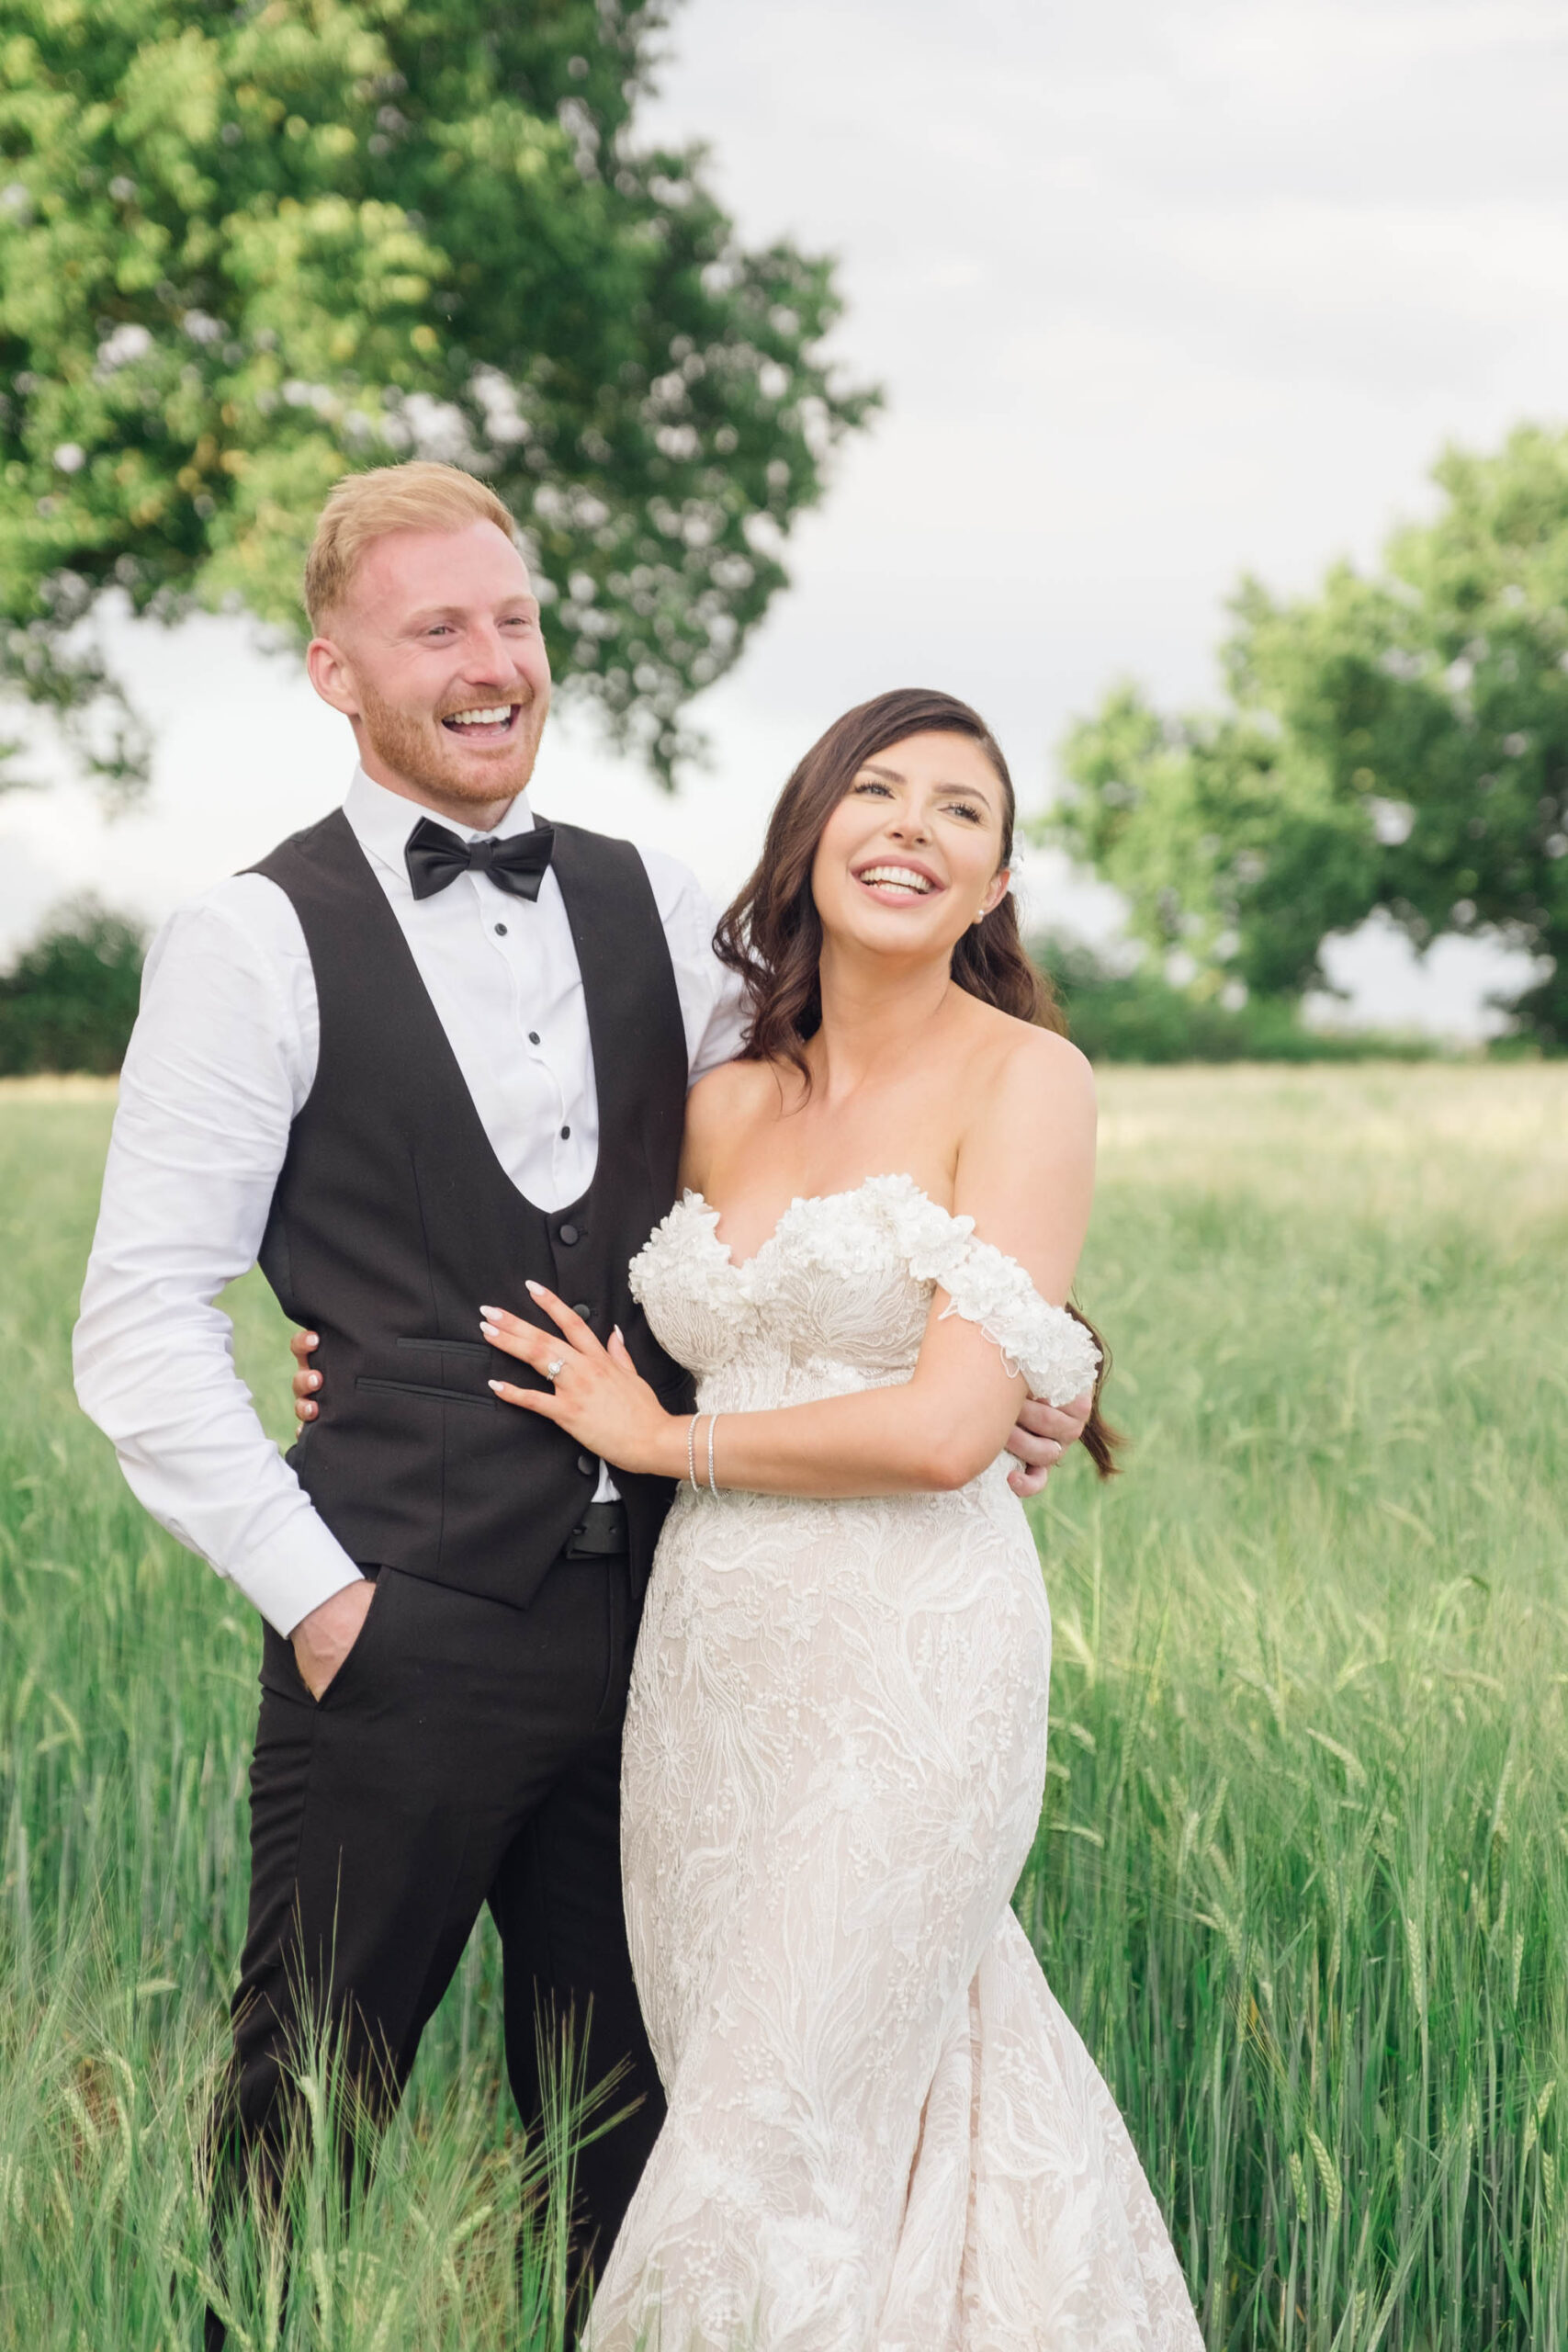 Groom and bride with a green cornfield behind them. He's in black bowtie and waistcoat with a white shirt. She wears a Bardot neck wedding dress. By Jordan Fox Photography